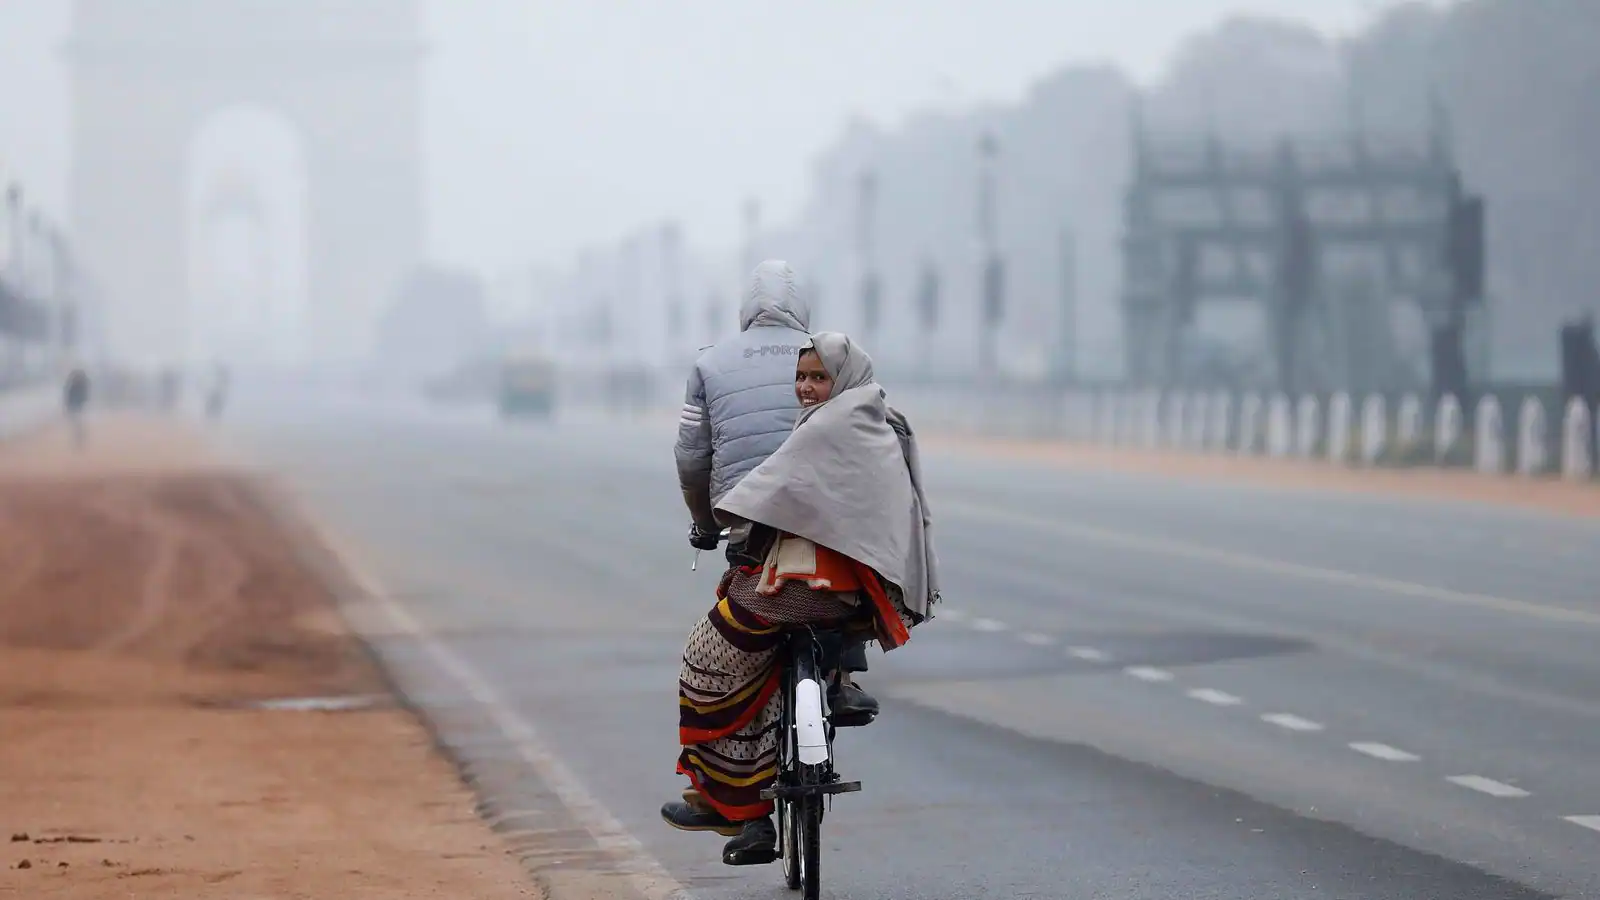 Too Cold To Handle! Delhi Shivers At 1.4°C, Season's Lowest. Cold Wave Likely To Last For 3 More Days